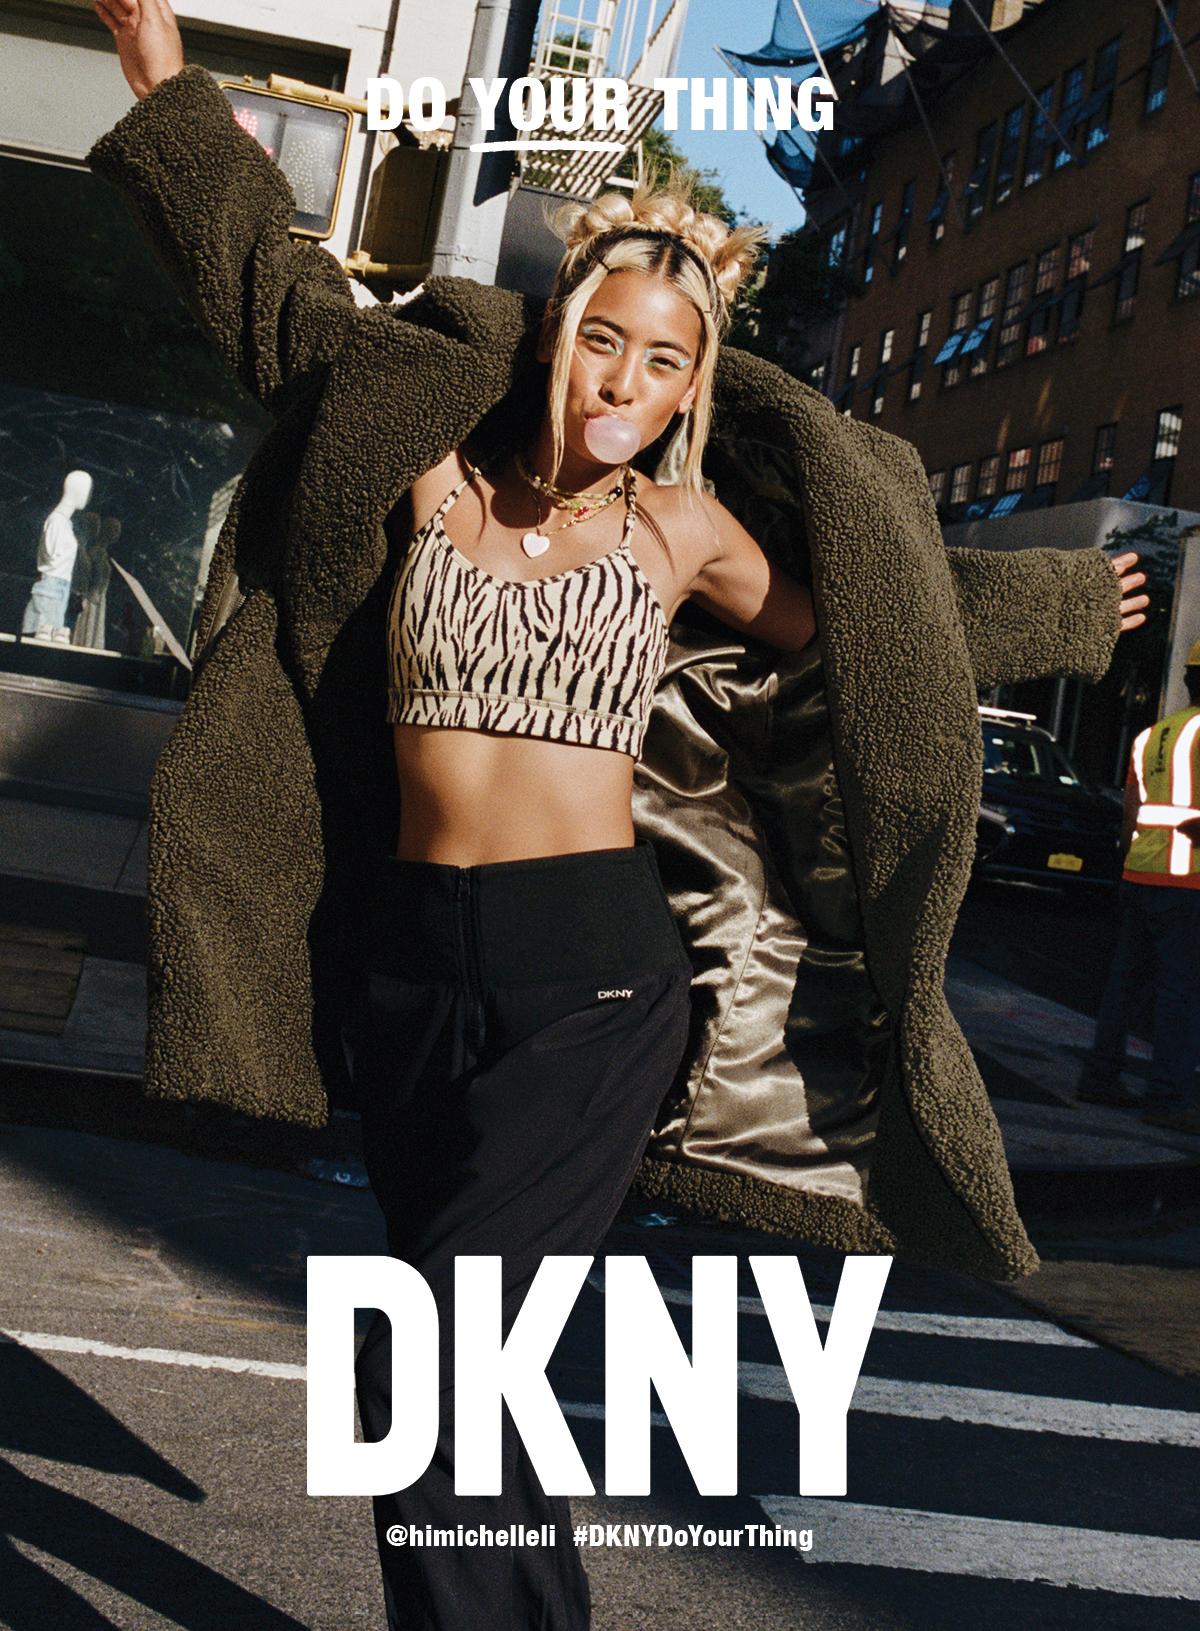 Nέα καμπάνια της DKNY, "Do Your Thing"